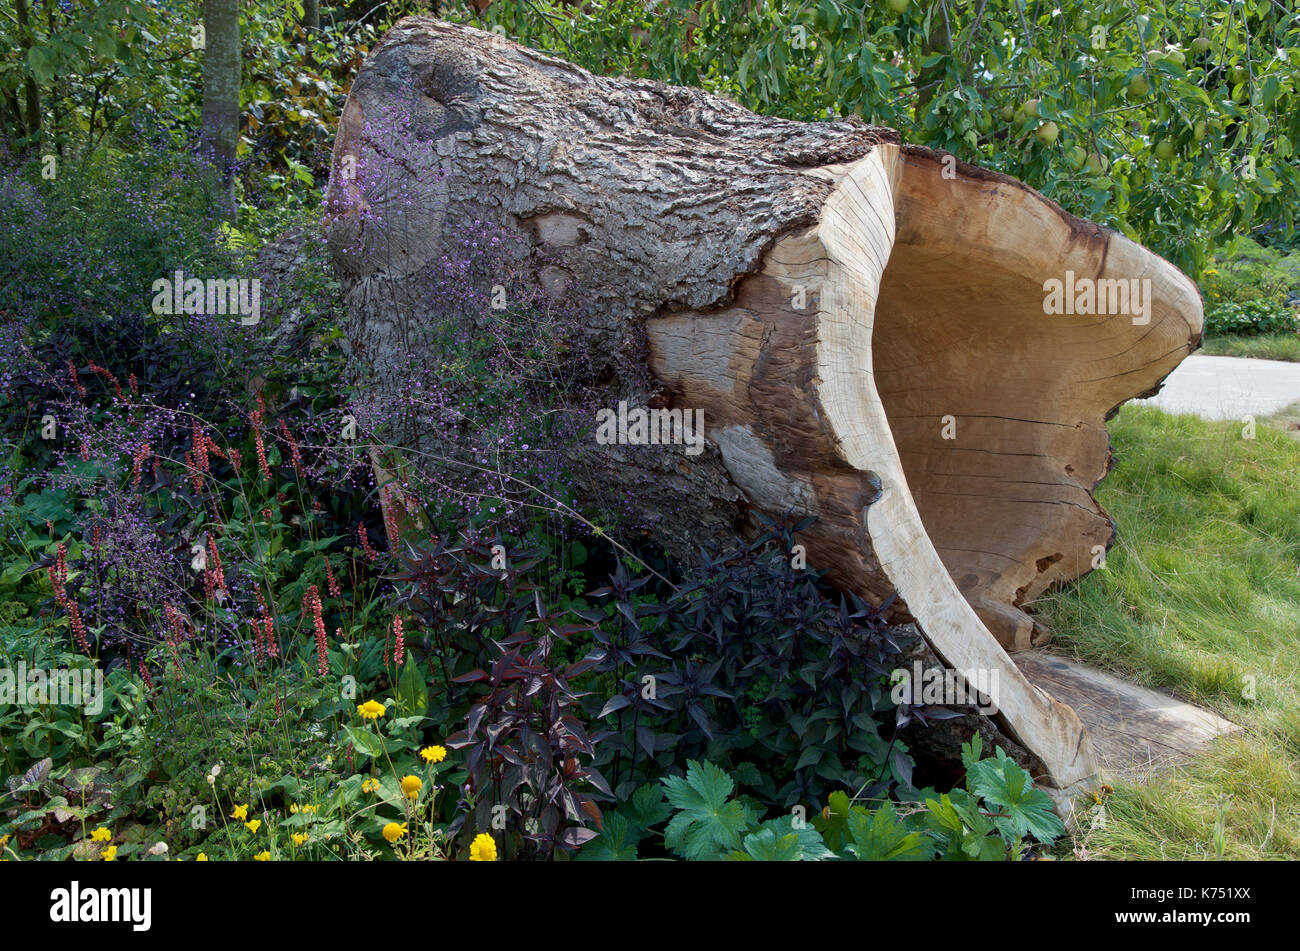 The Hollow Log in The Zoflora and Caudwell Children's Wild Garden at RHS Hampton Court Palace Flower Show 2017. The garden designed by Adam White and  Stock Photo